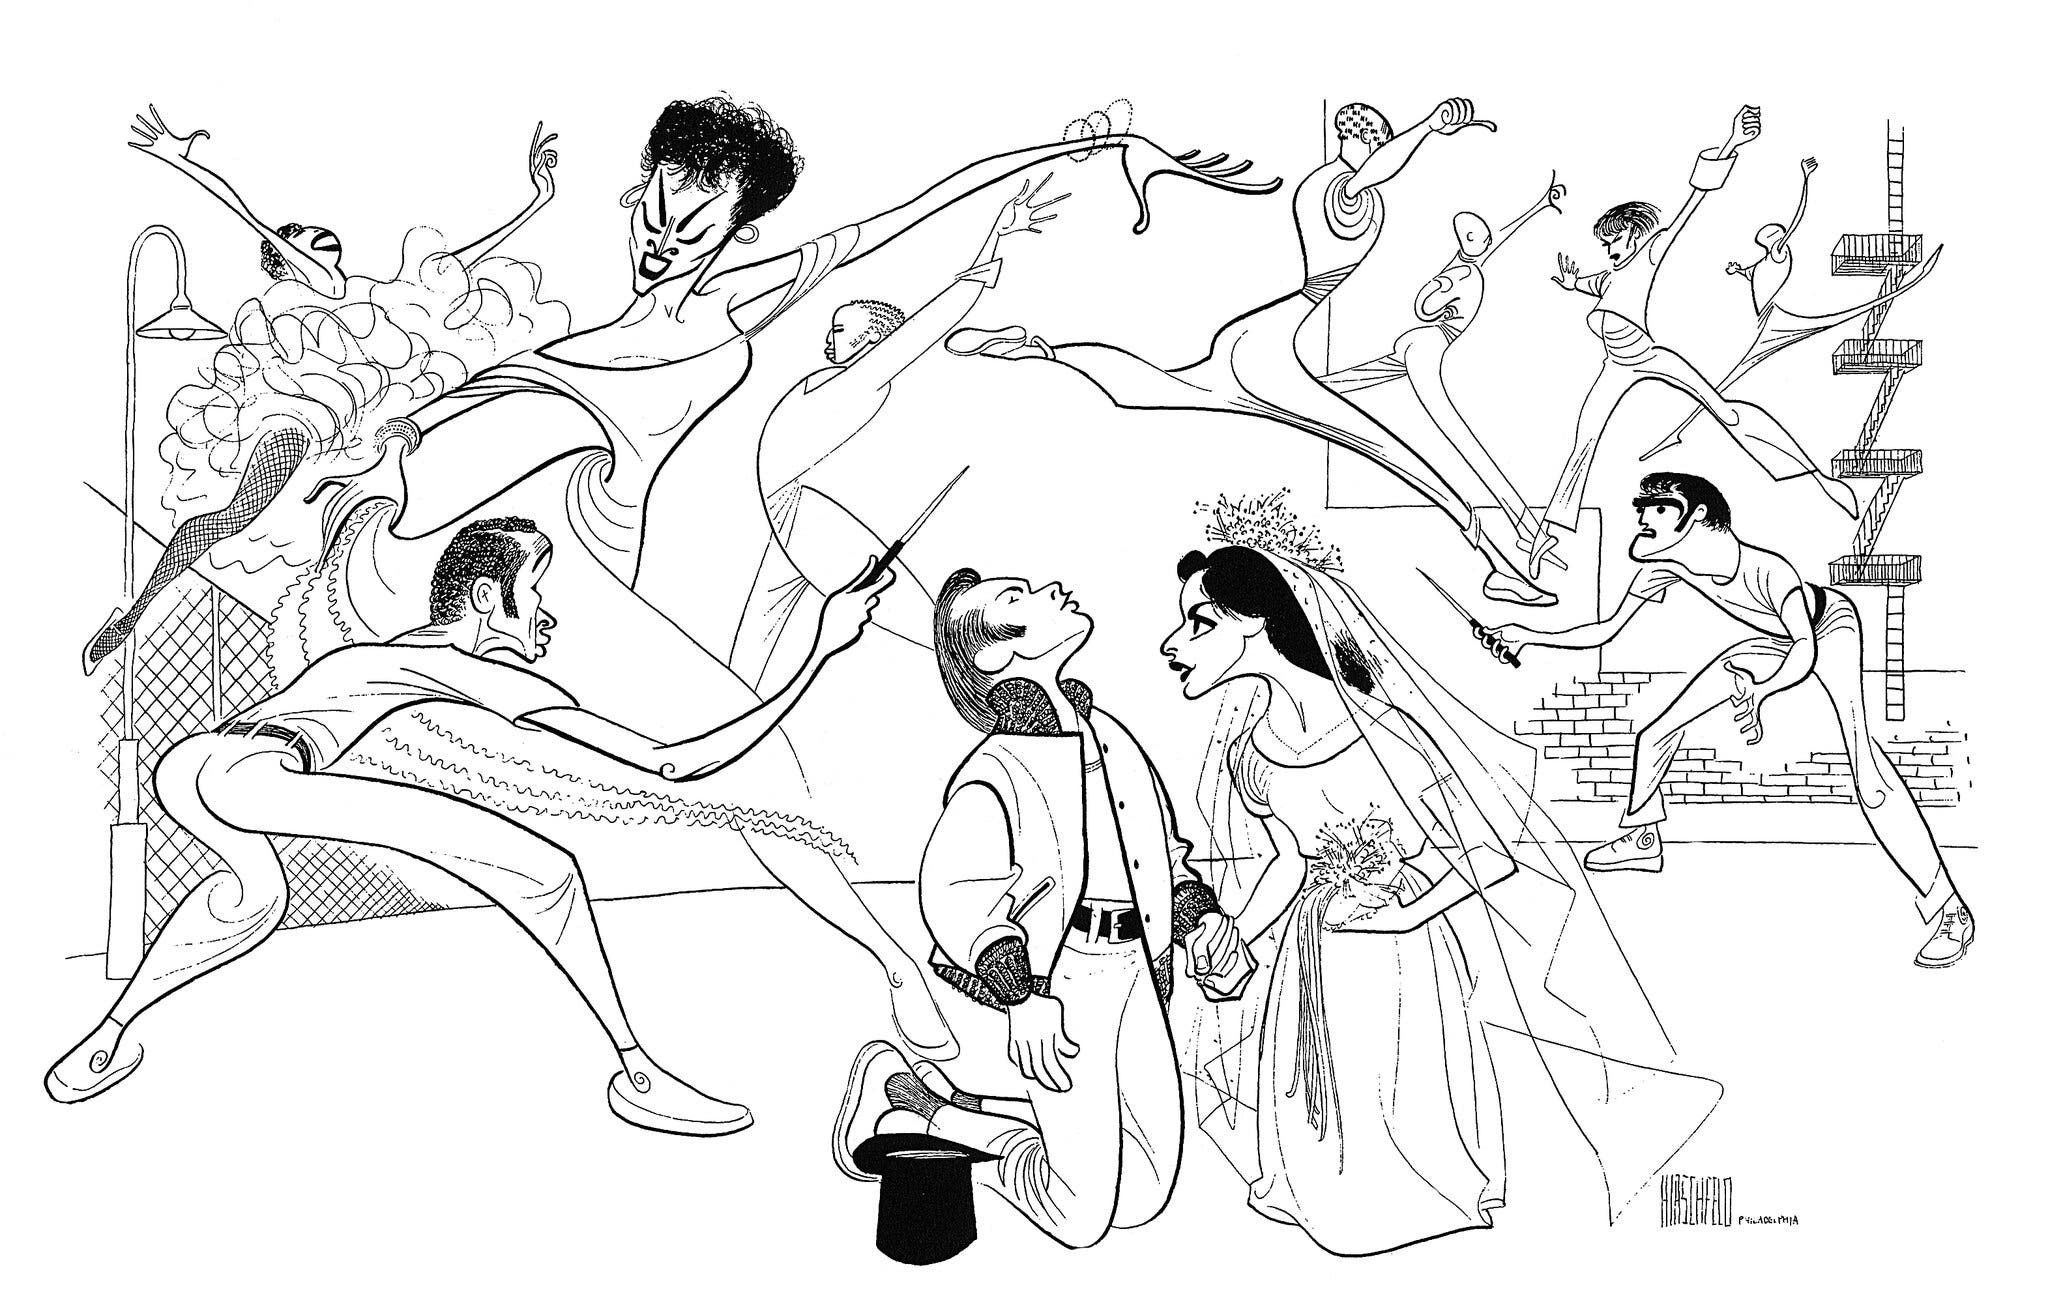 Hirschfeld's caricature of a moment in West Side Story